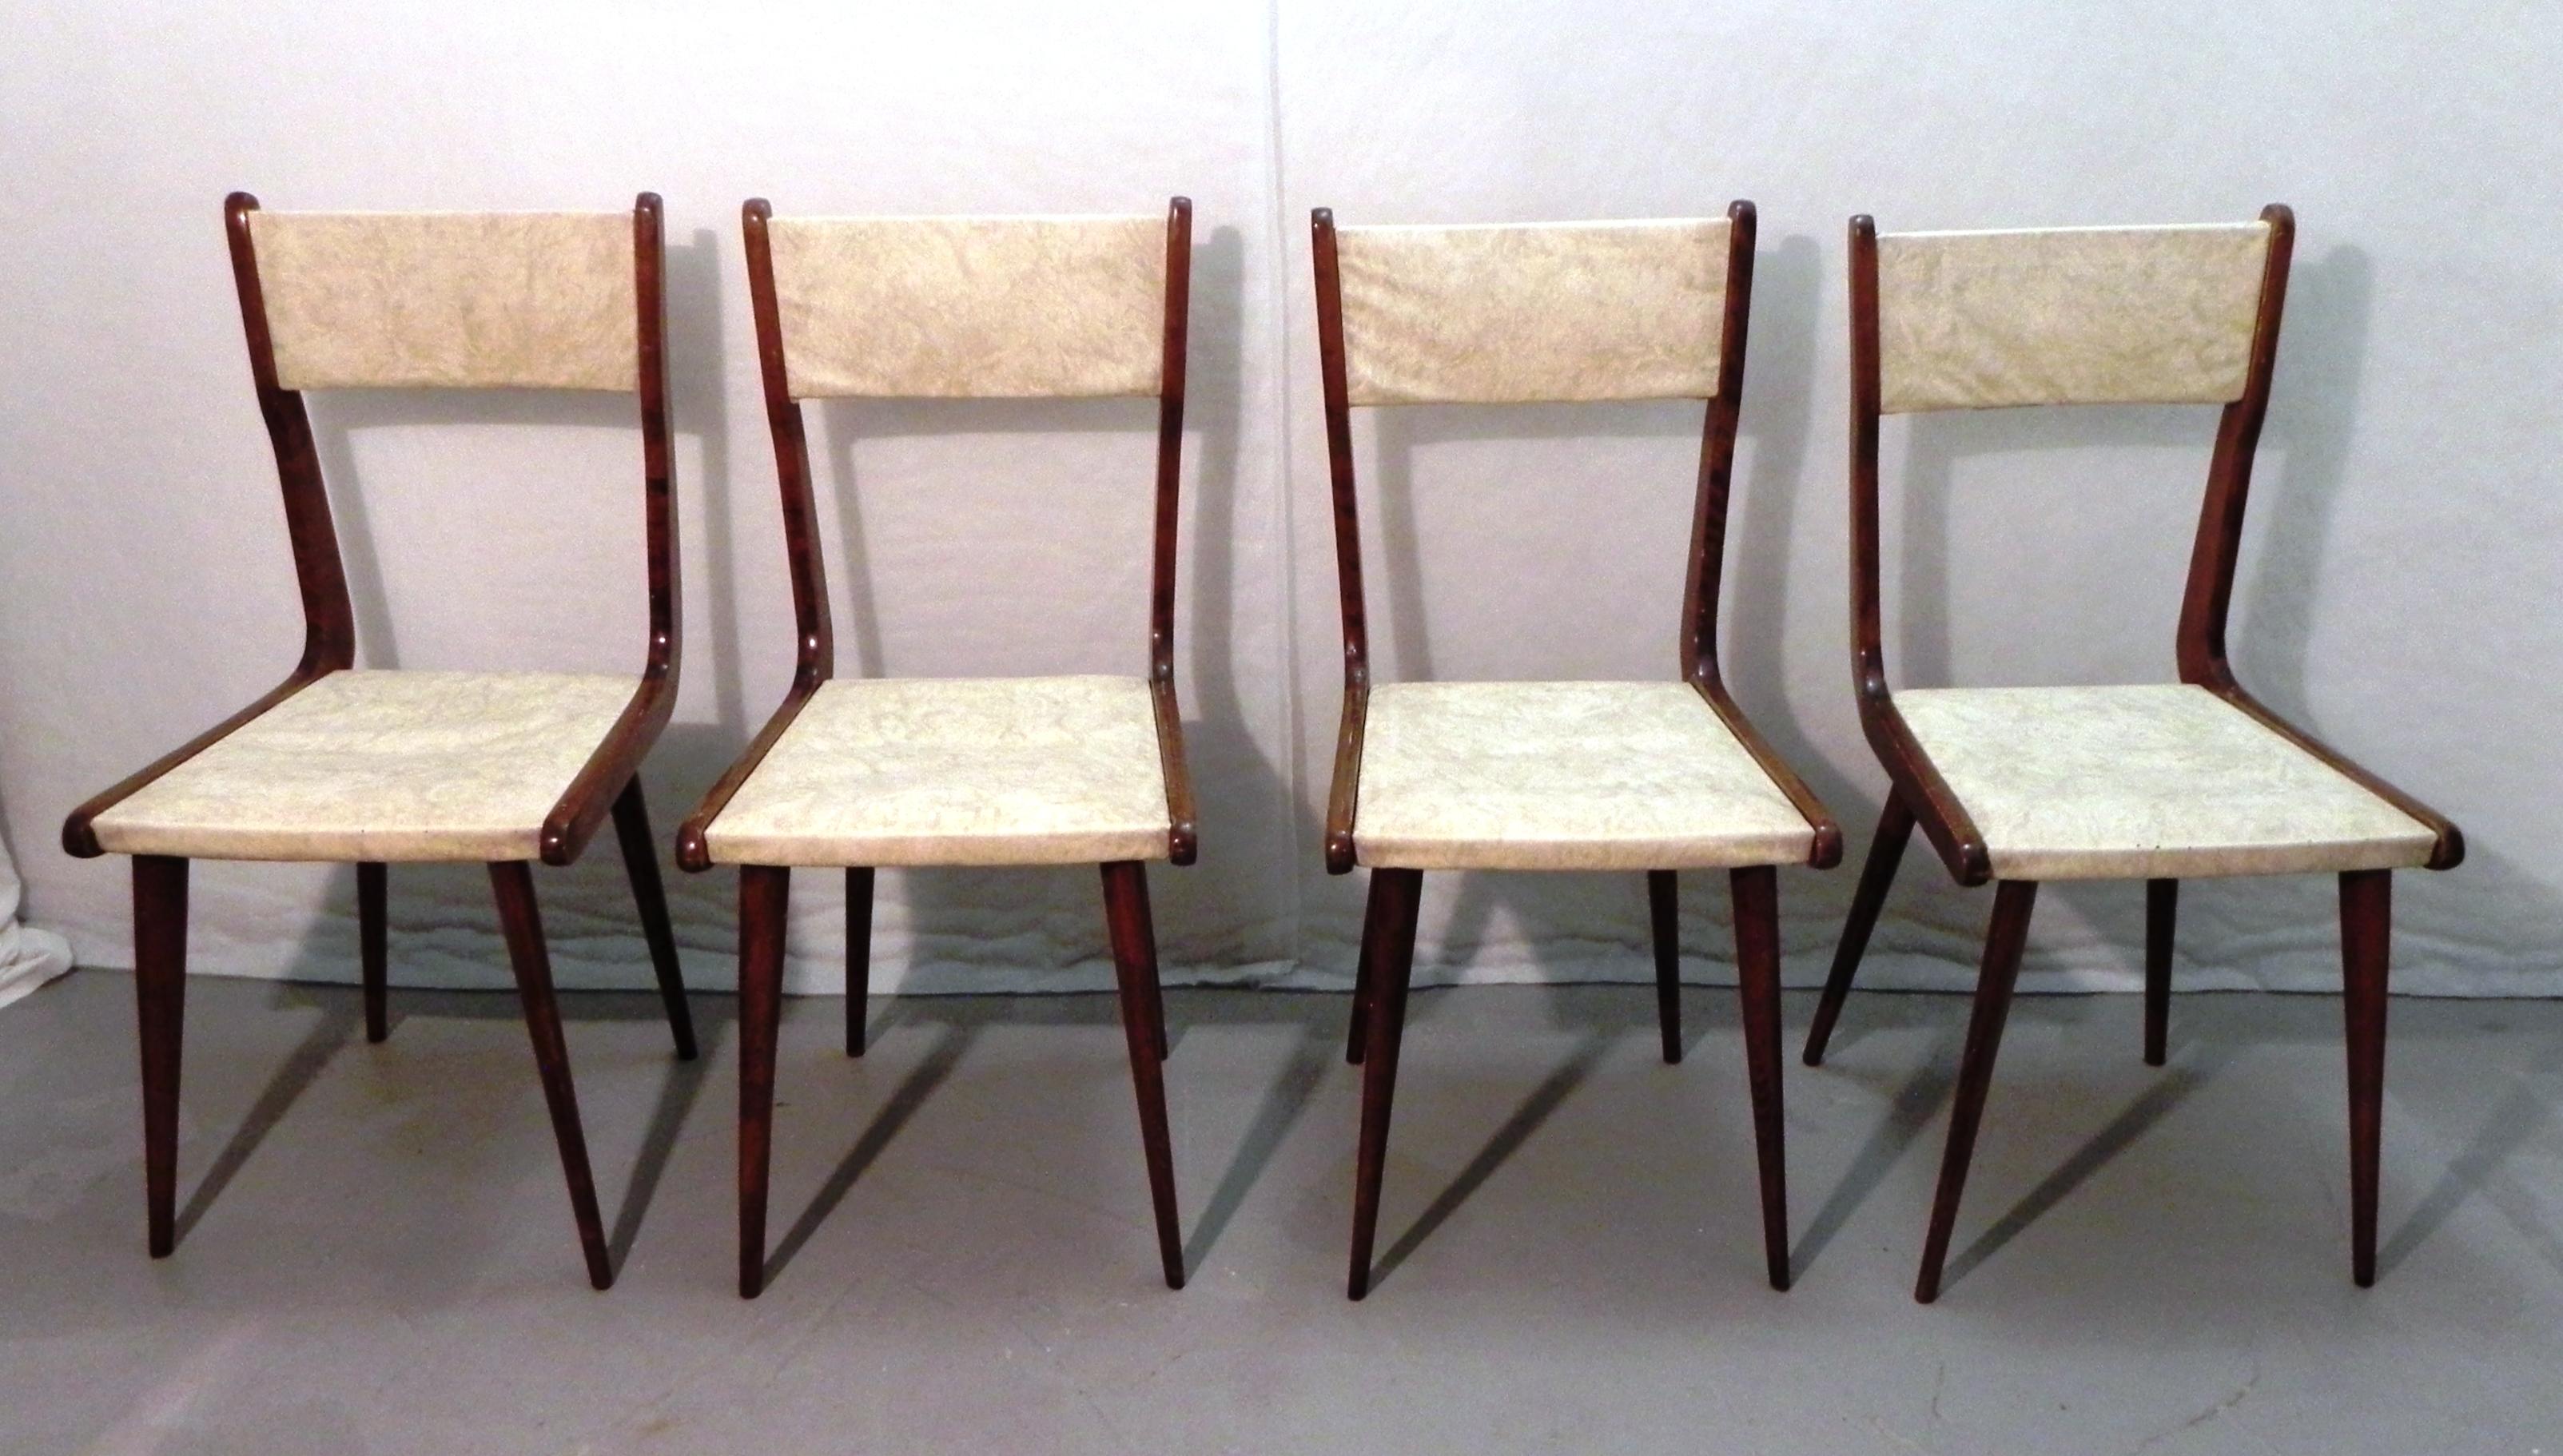 

4 Mid Century Modern chairs in the style of Carlo Ratti 1960s. Wooden shaft, skai covering. The chairs show signs of woodworm; a specific treatment was performed. The upholstery is in good condition, as are the straps under the seat. The chairs